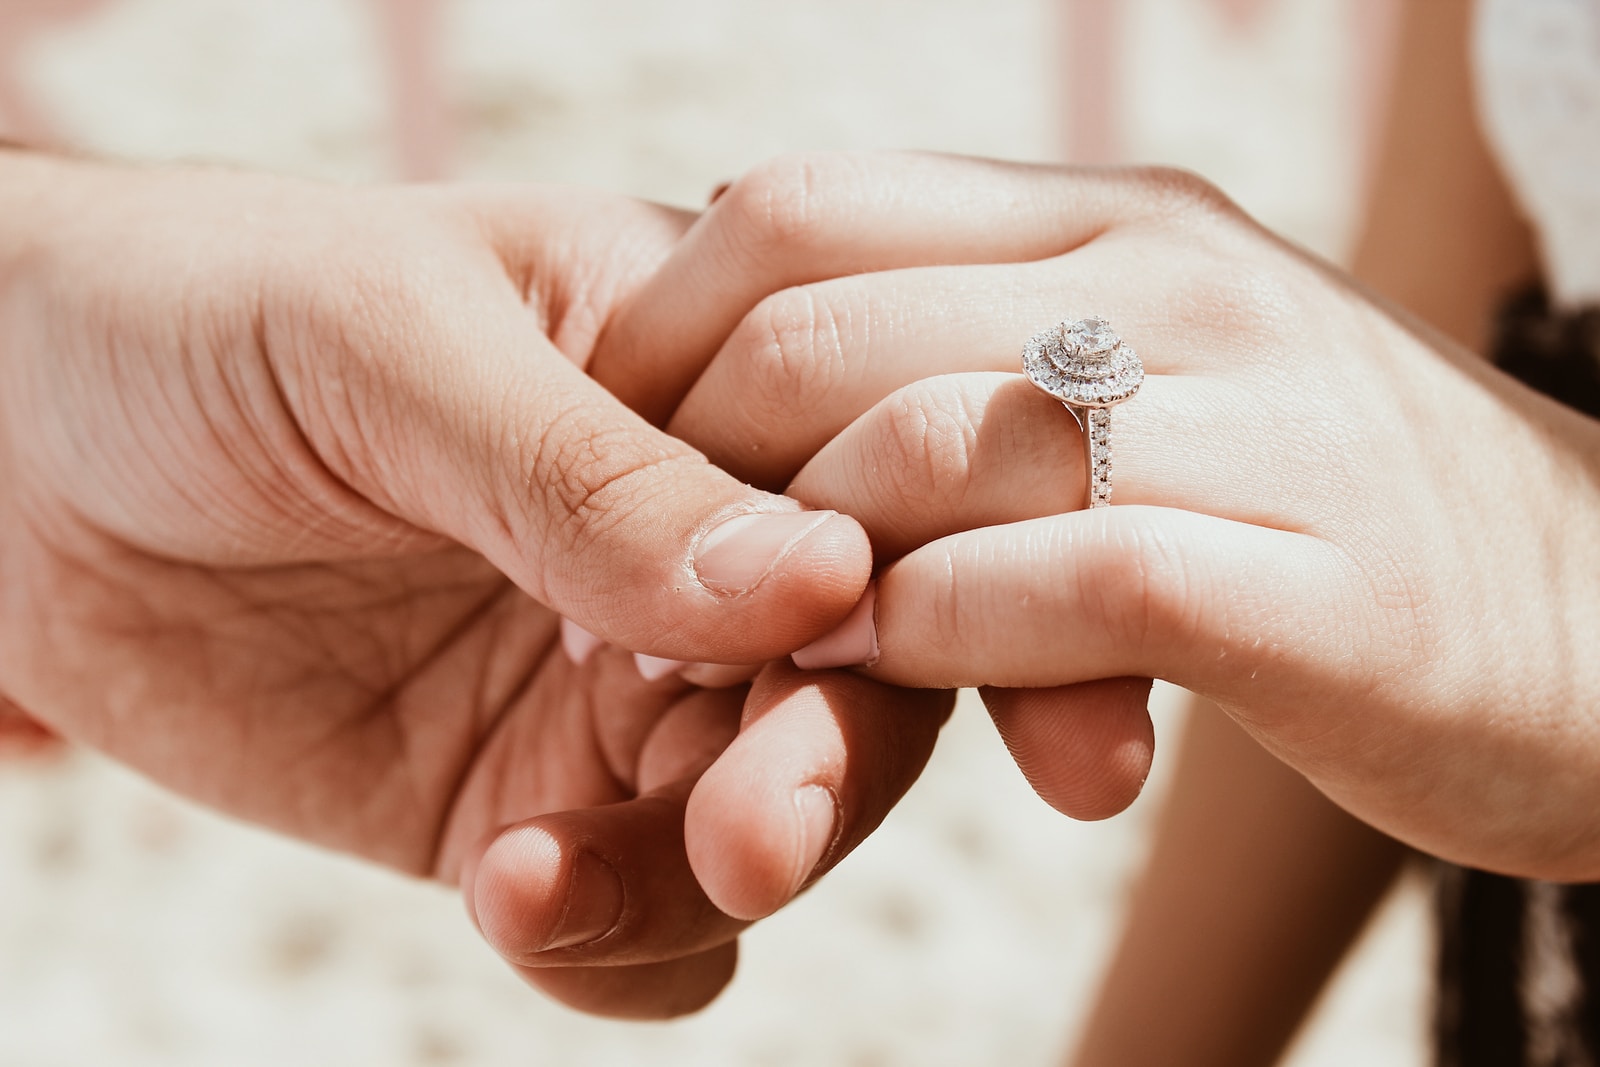 Gifts Romantic Partner Proposing person holding another person's hand with ring